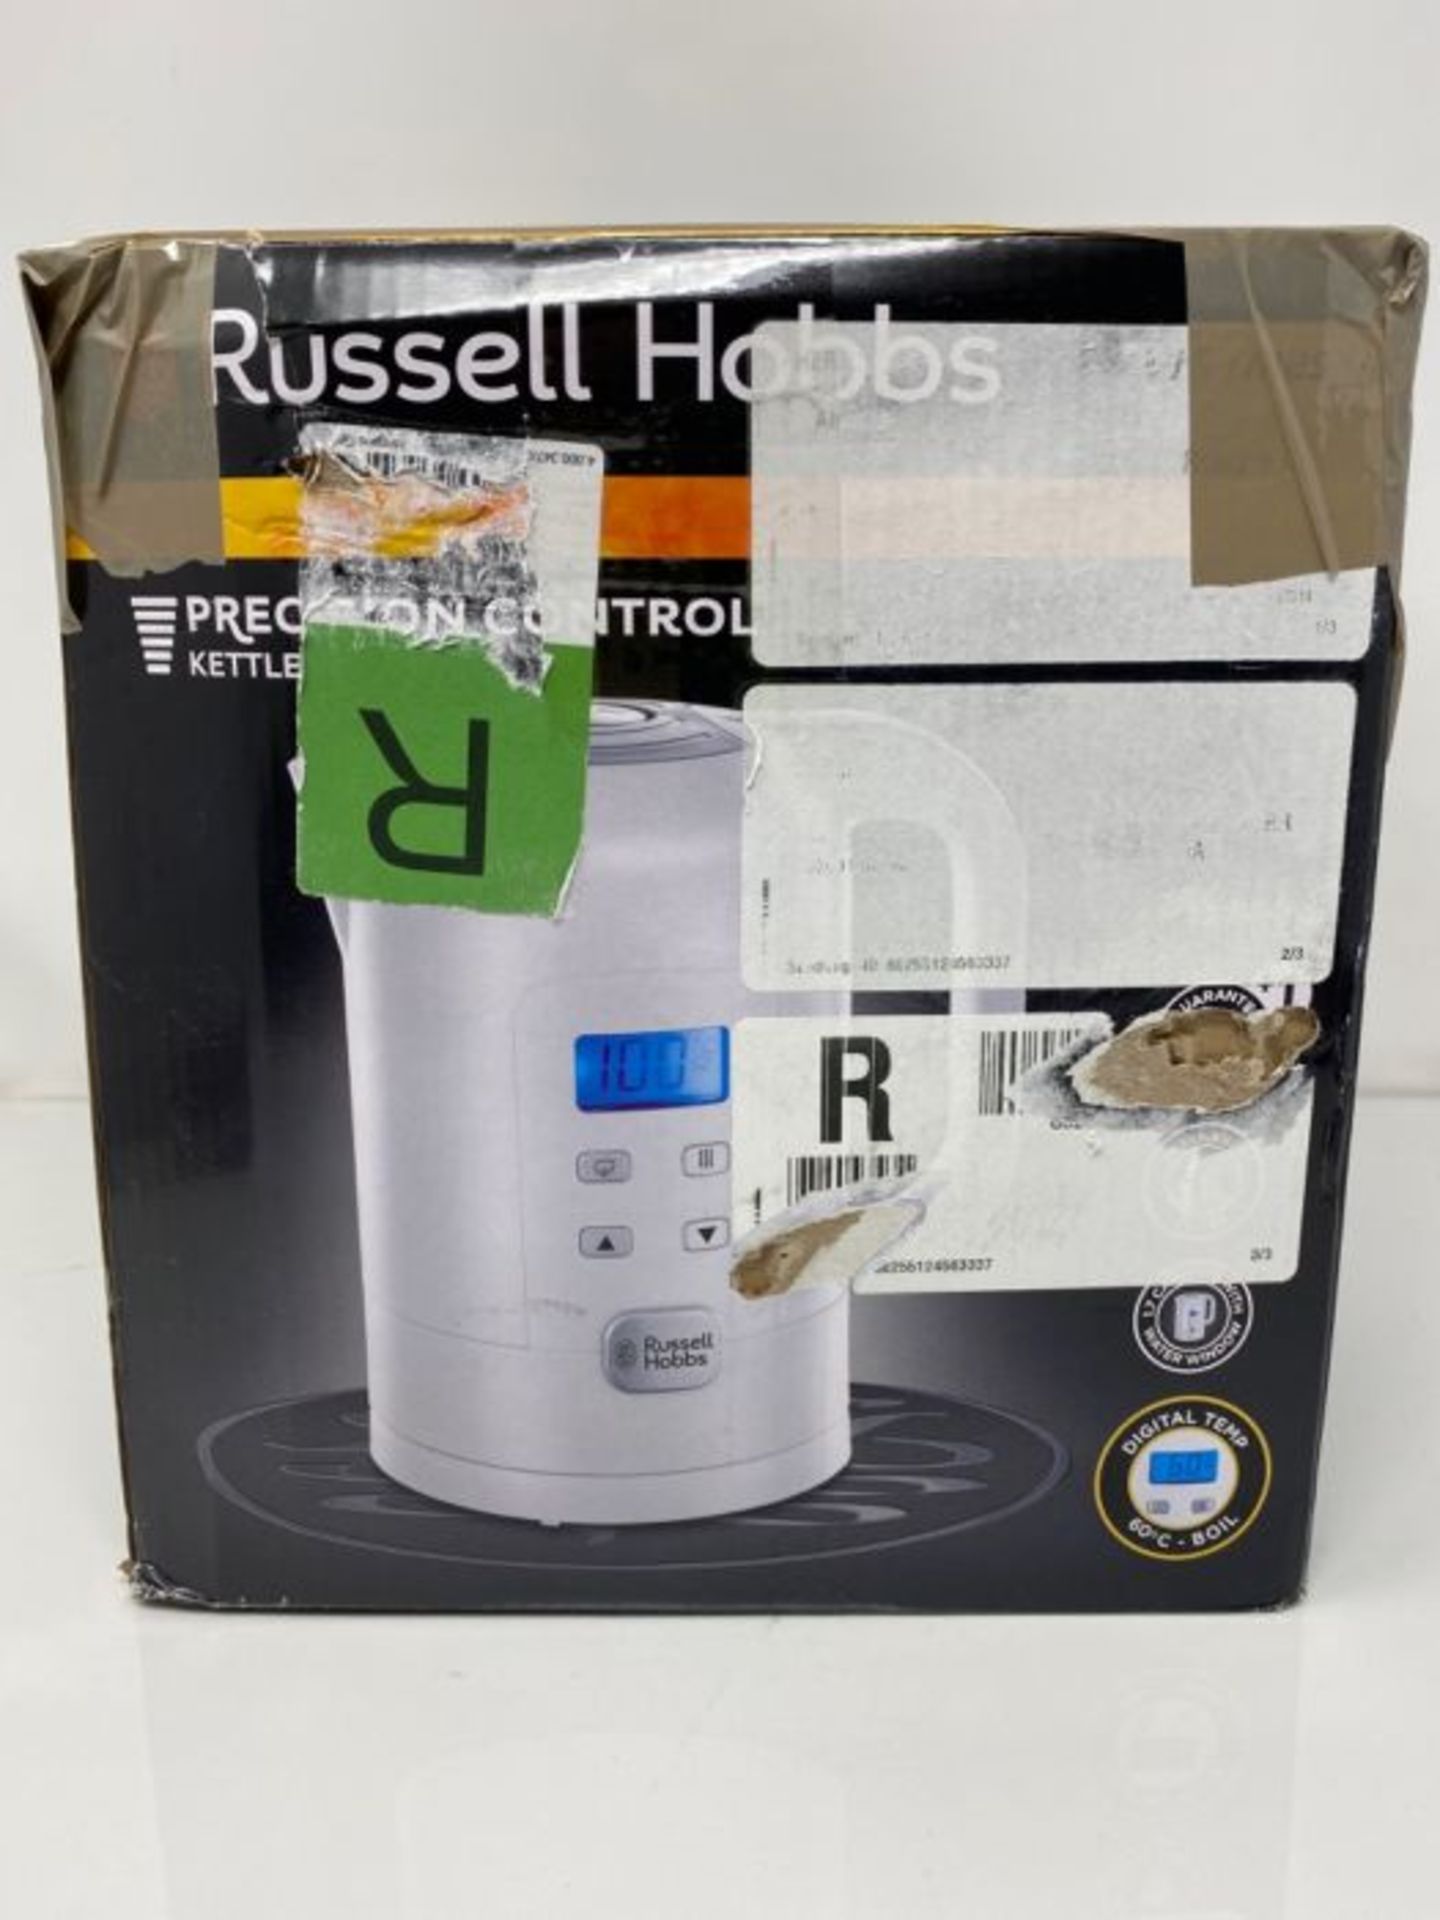 Russell Hobbs 21150-70 electrical kettle - electric kettles - Image 2 of 3